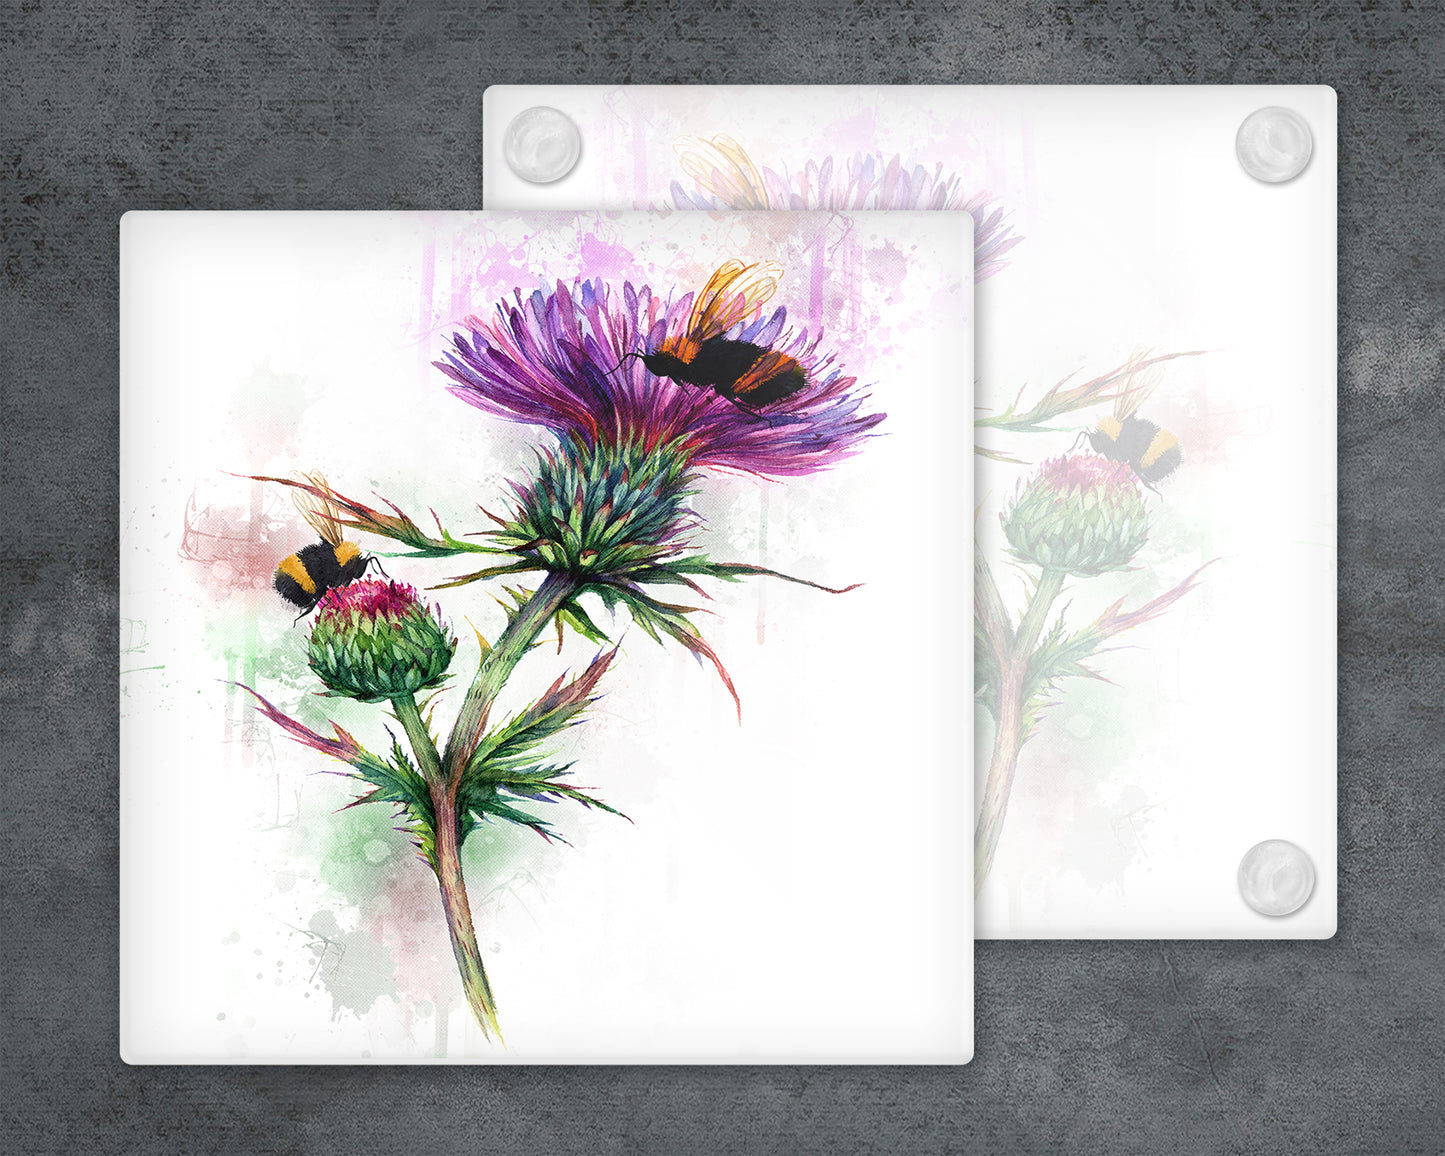 Thistle and Bees Glass  Coaster, Drinks Holder, Buzzy Bees Coaster, Scotland, Scottish Gift, Buzzy Bees Gift